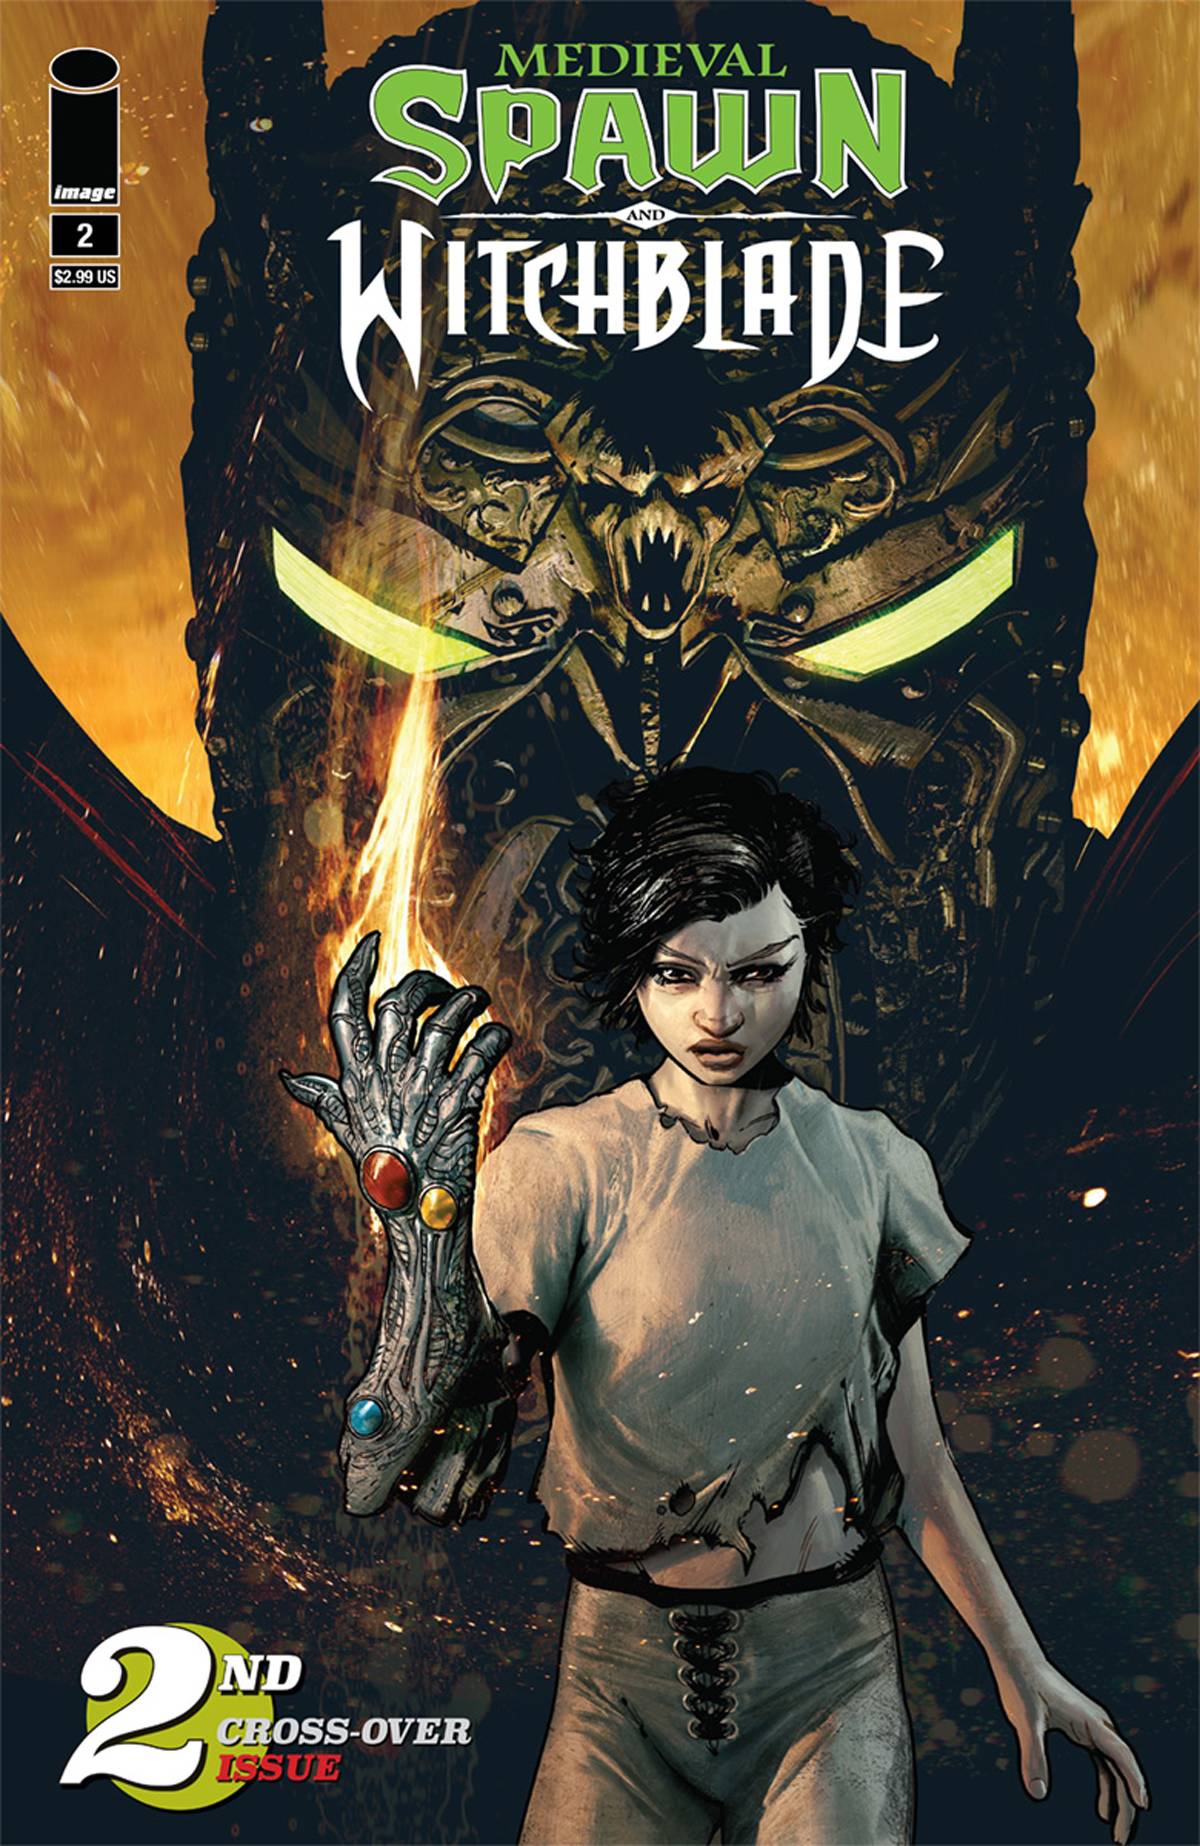 Medieval Spawn Witchblade #2 (Of 4)